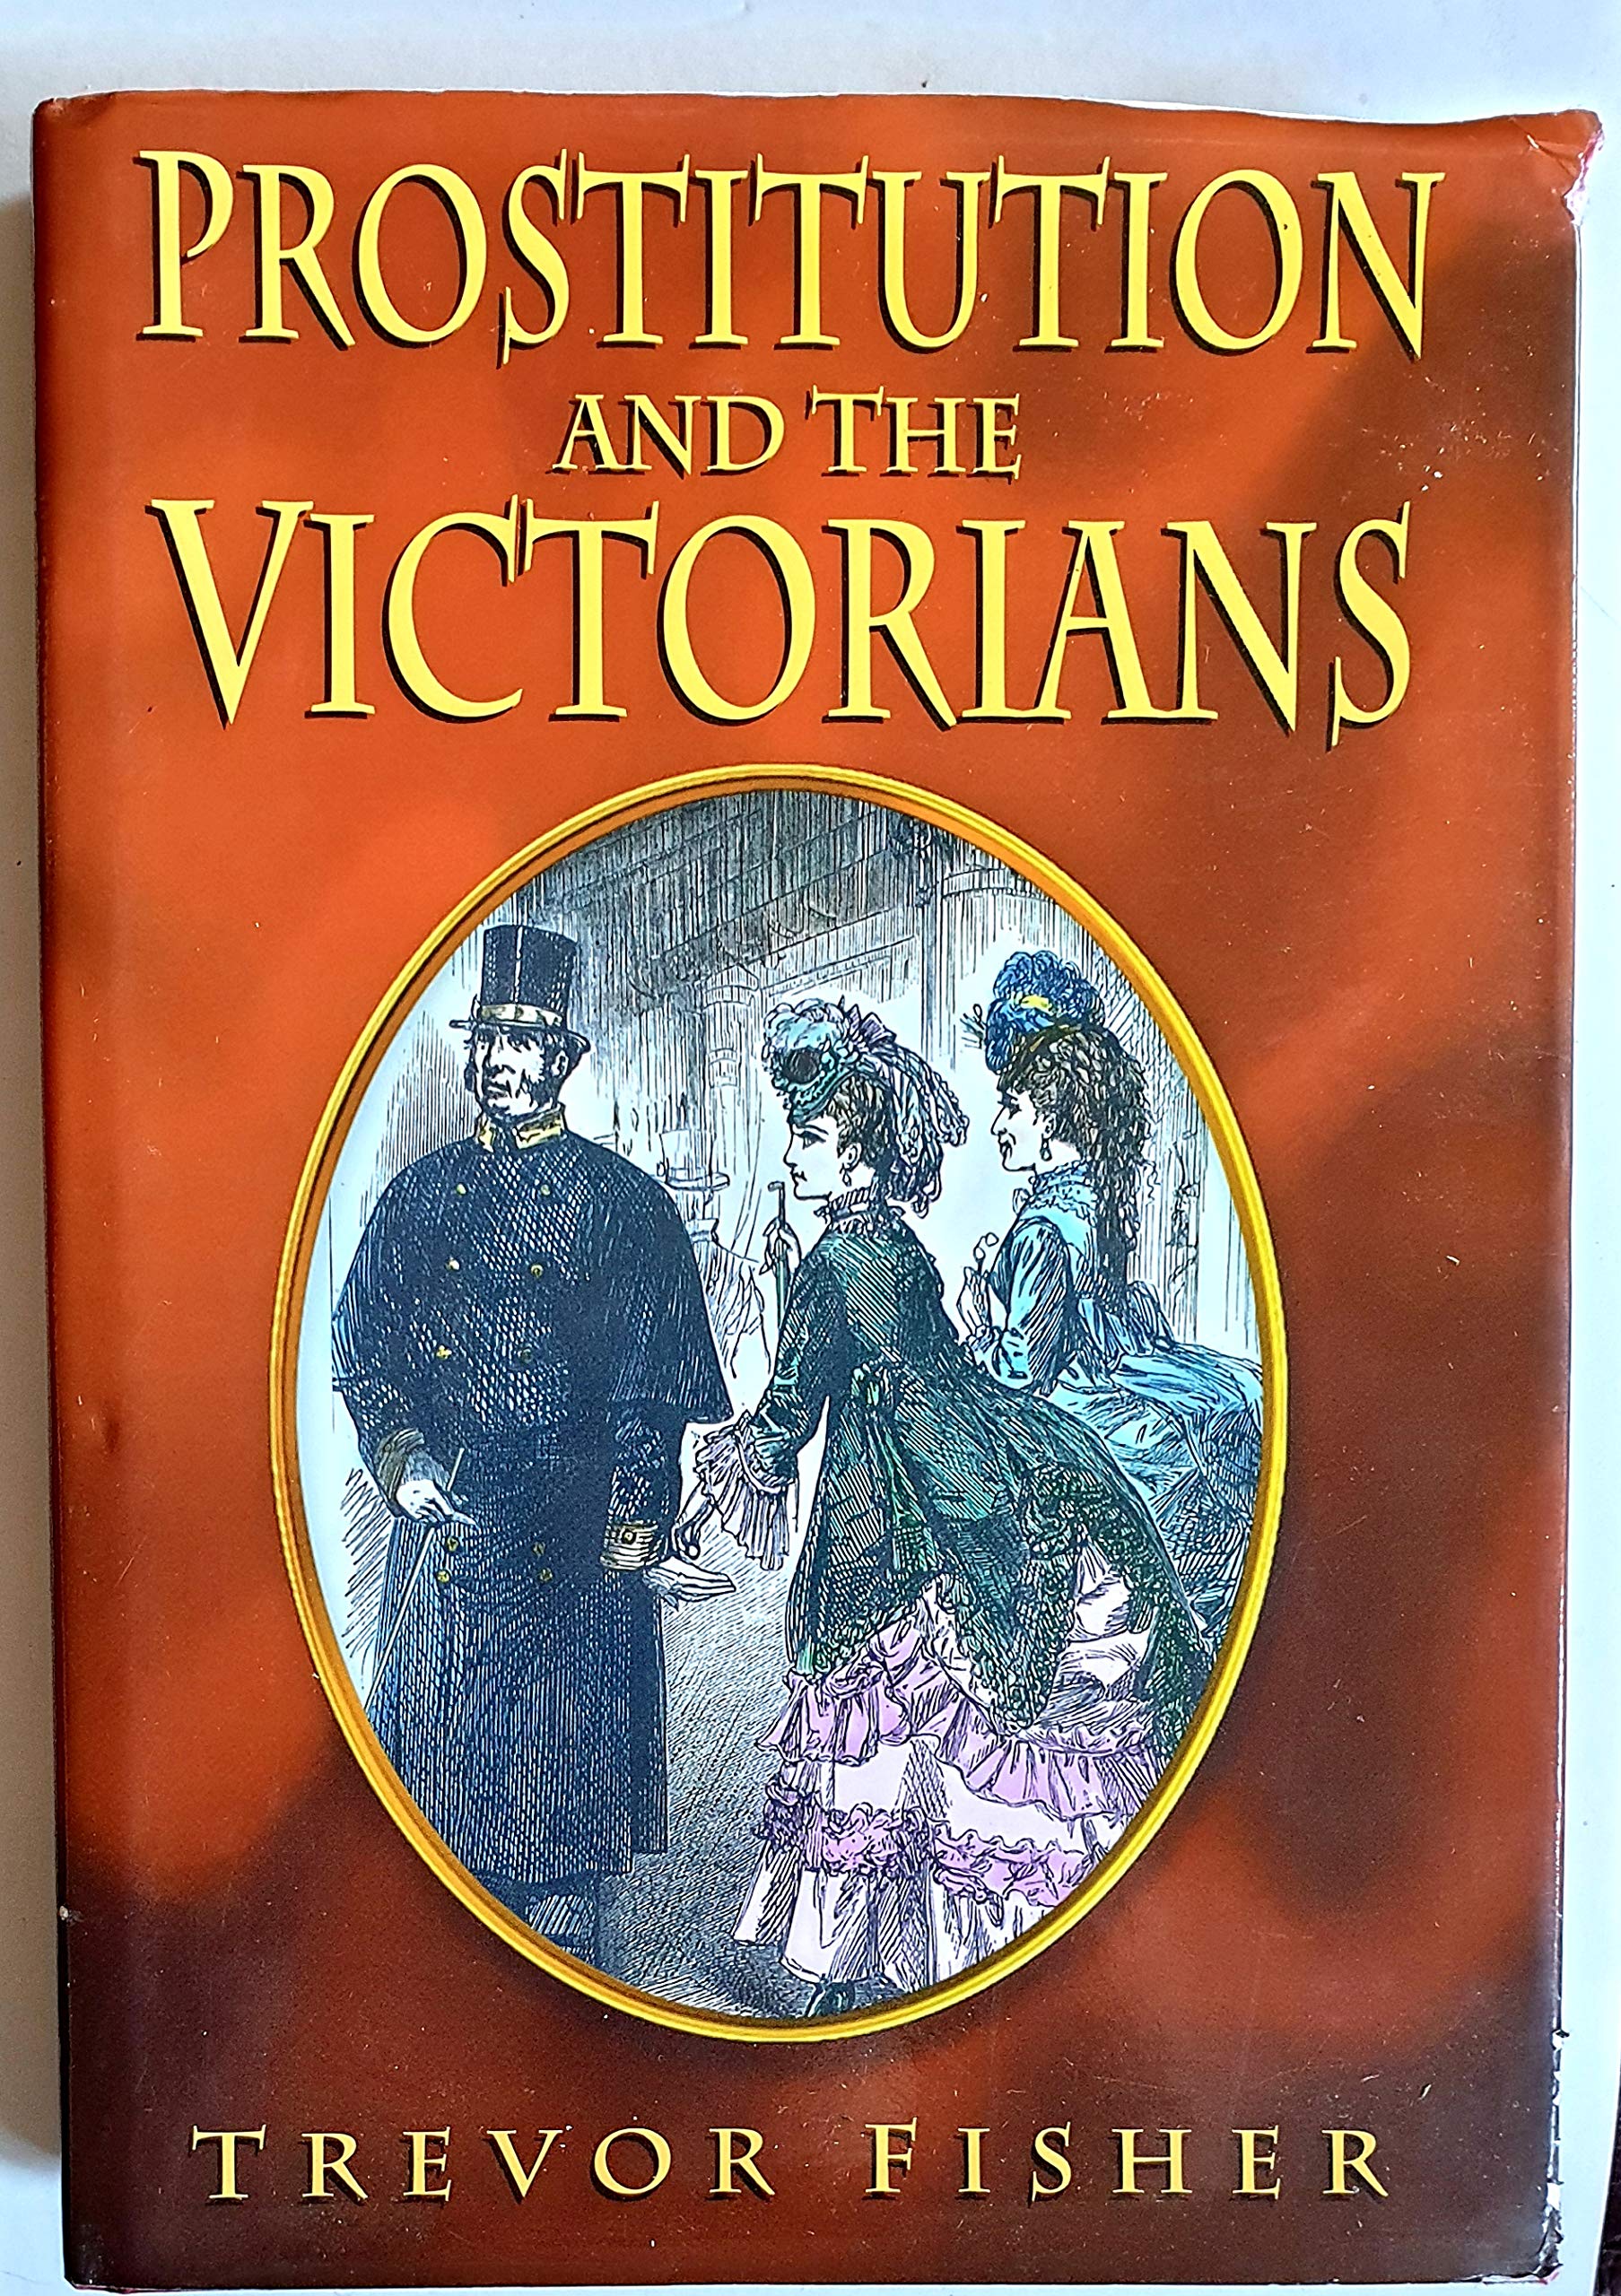 Prostitution and the Victorians magazine reviews